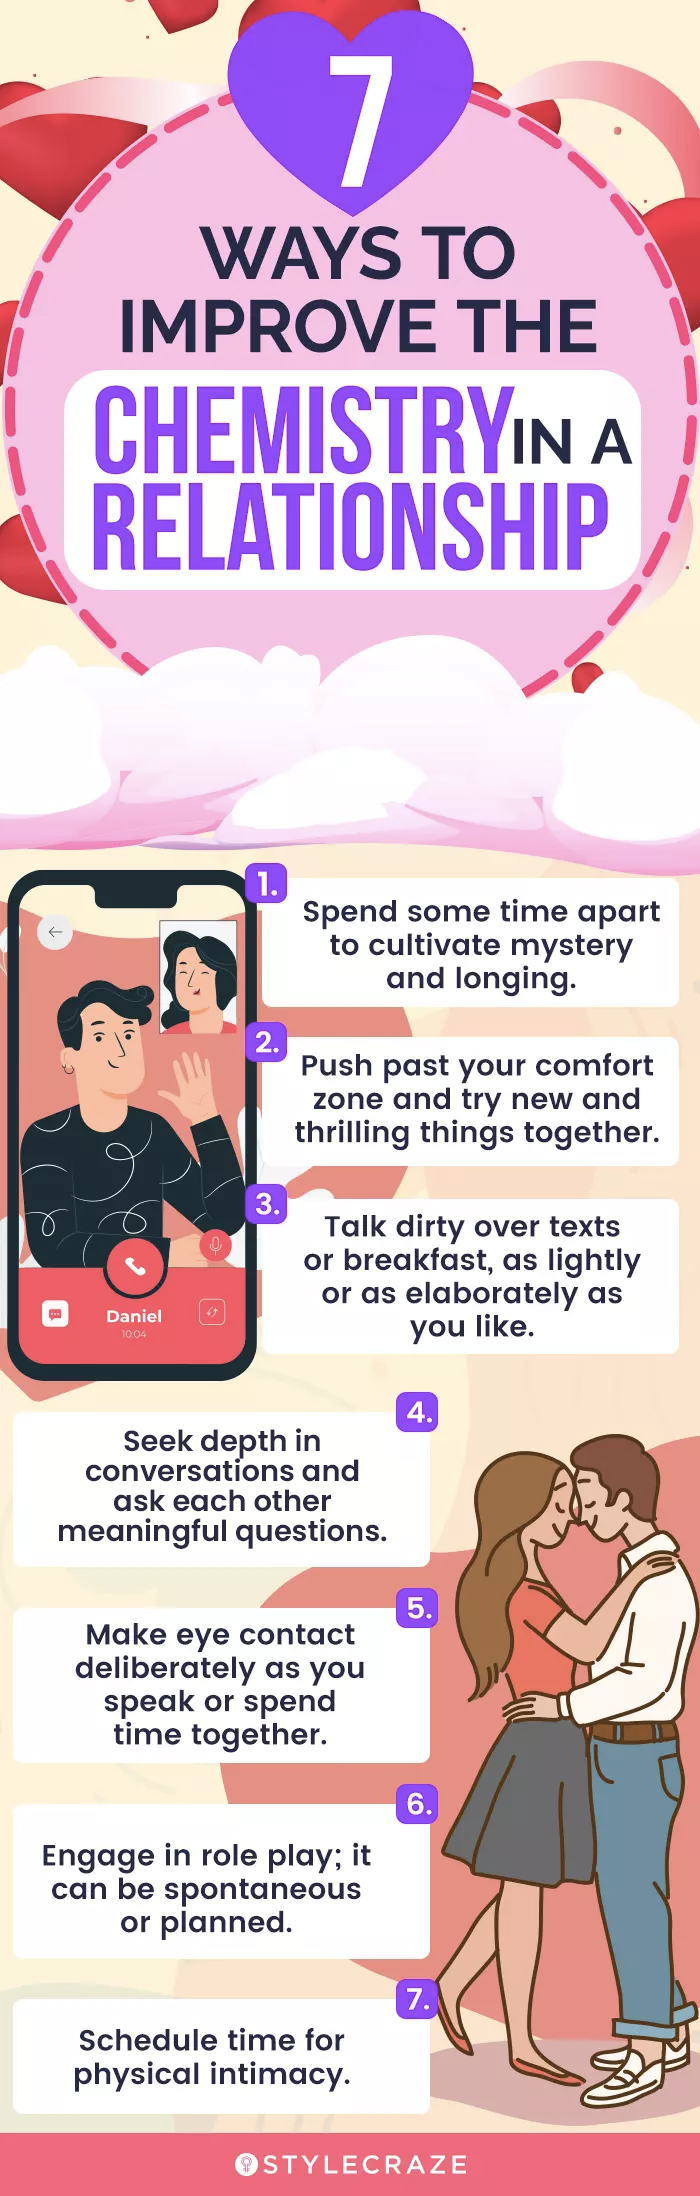 7 ways to improve the chemistry in a relationship (infographic)